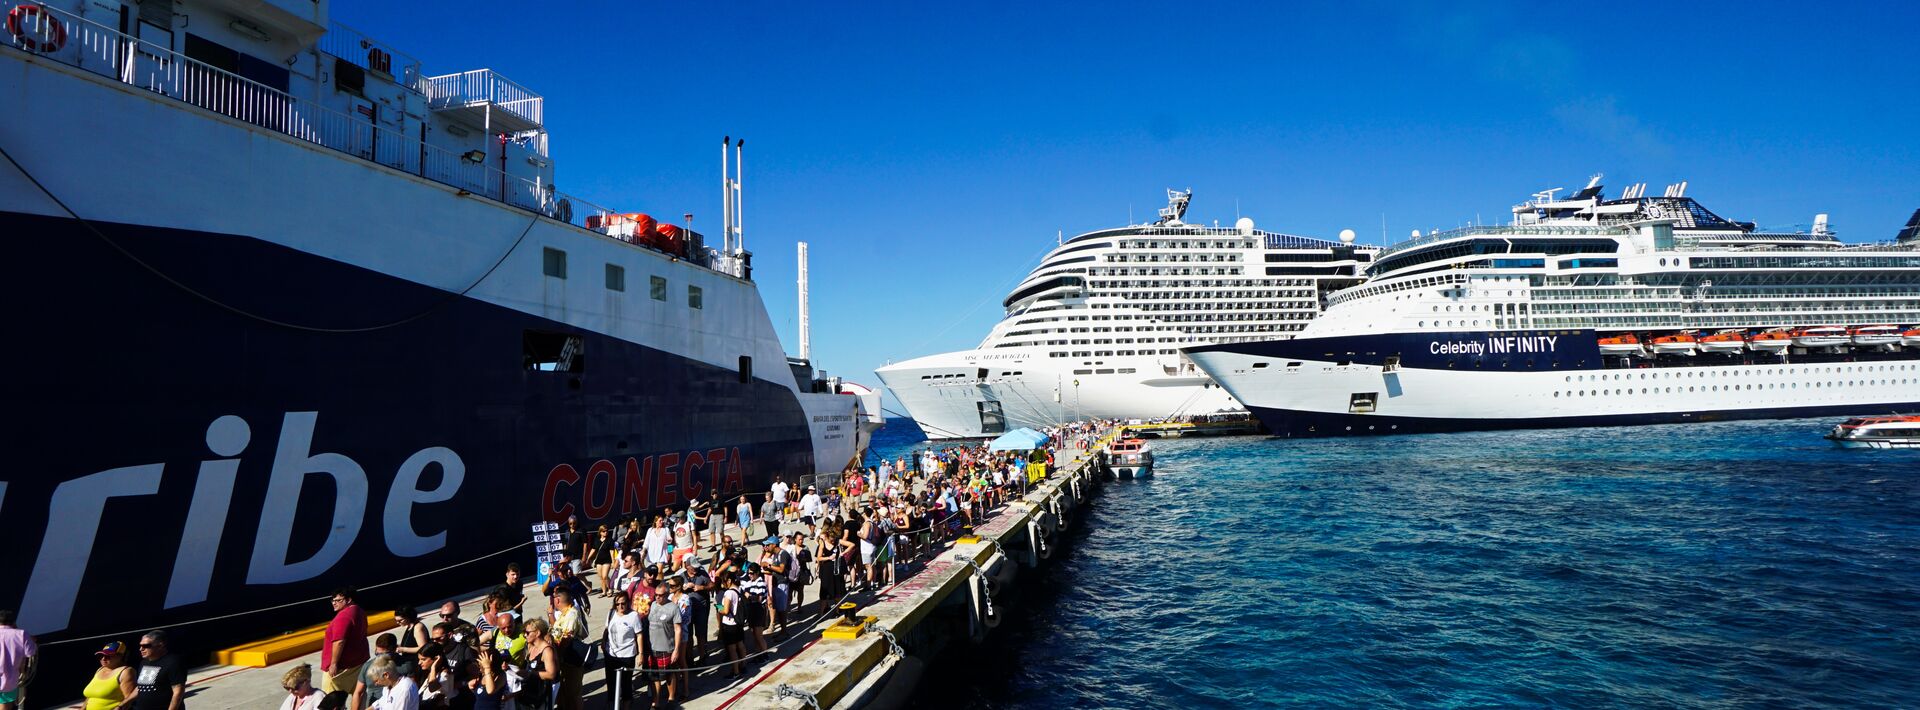 people boarding onto a cruise ship at port in cozumel